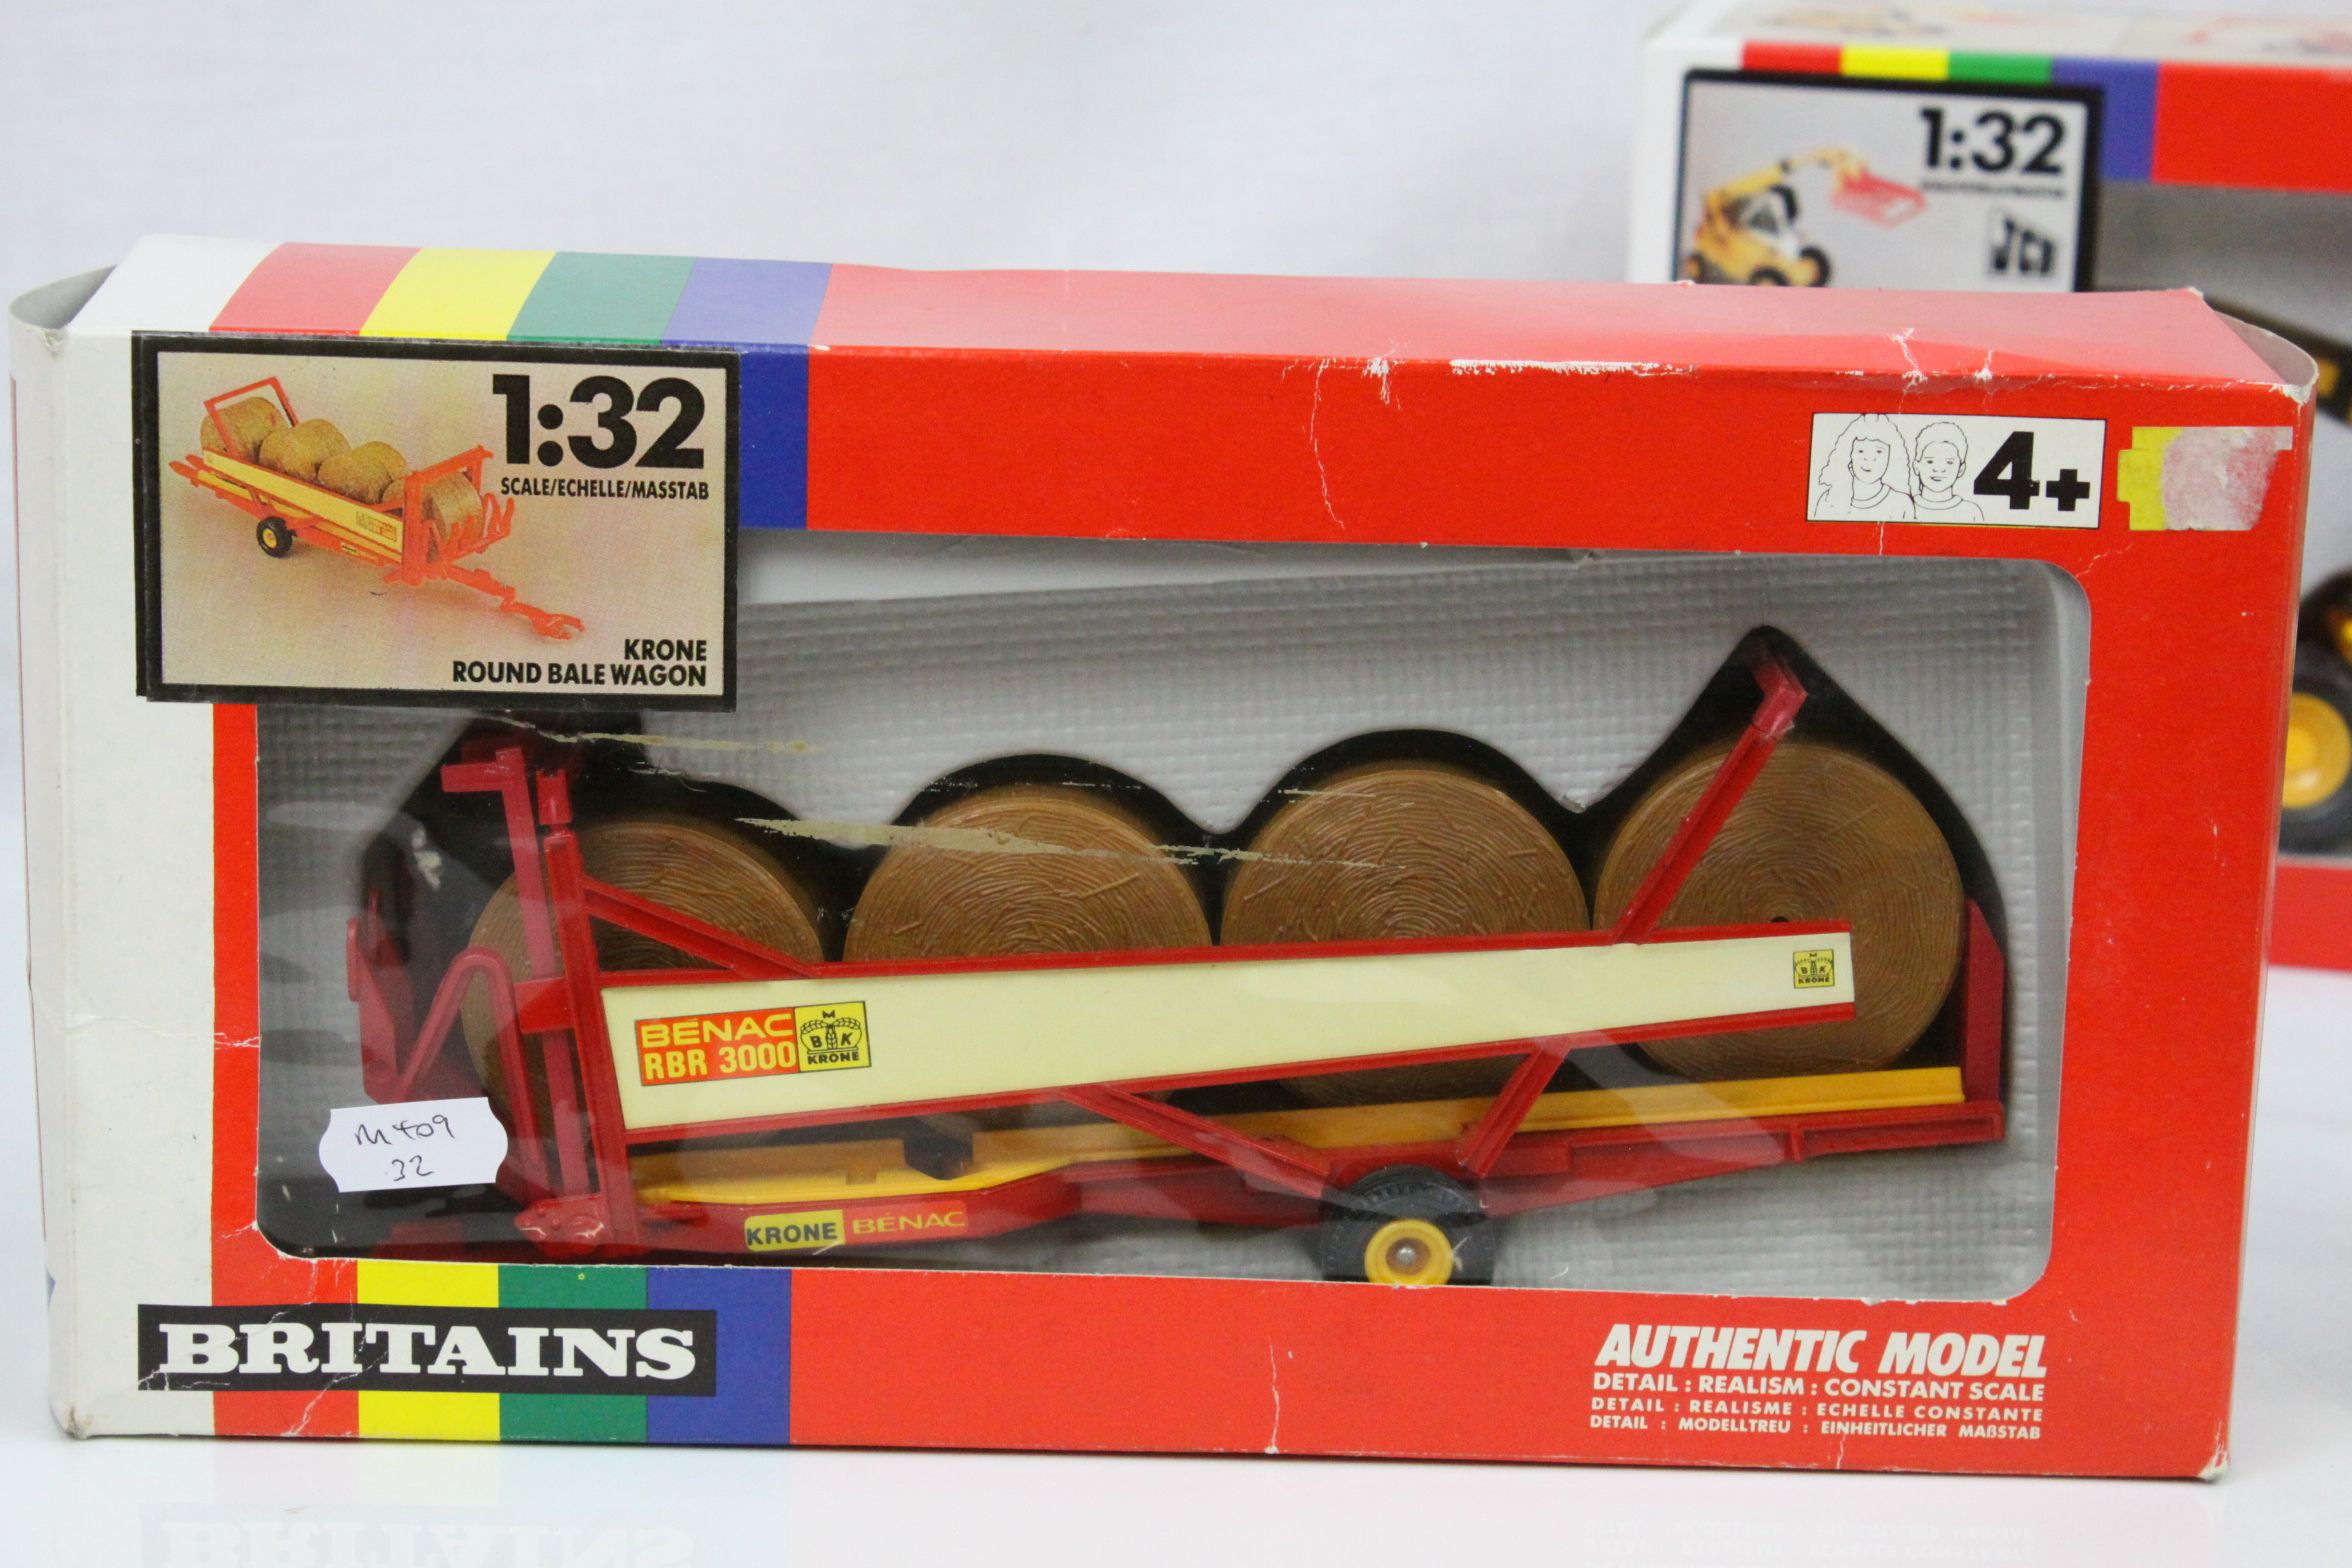 16 Boxed 1:32 Britains farming models to include 9566, 9559, 9539, 9548, 9547, 9574, 9509, 9519, - Image 25 of 27